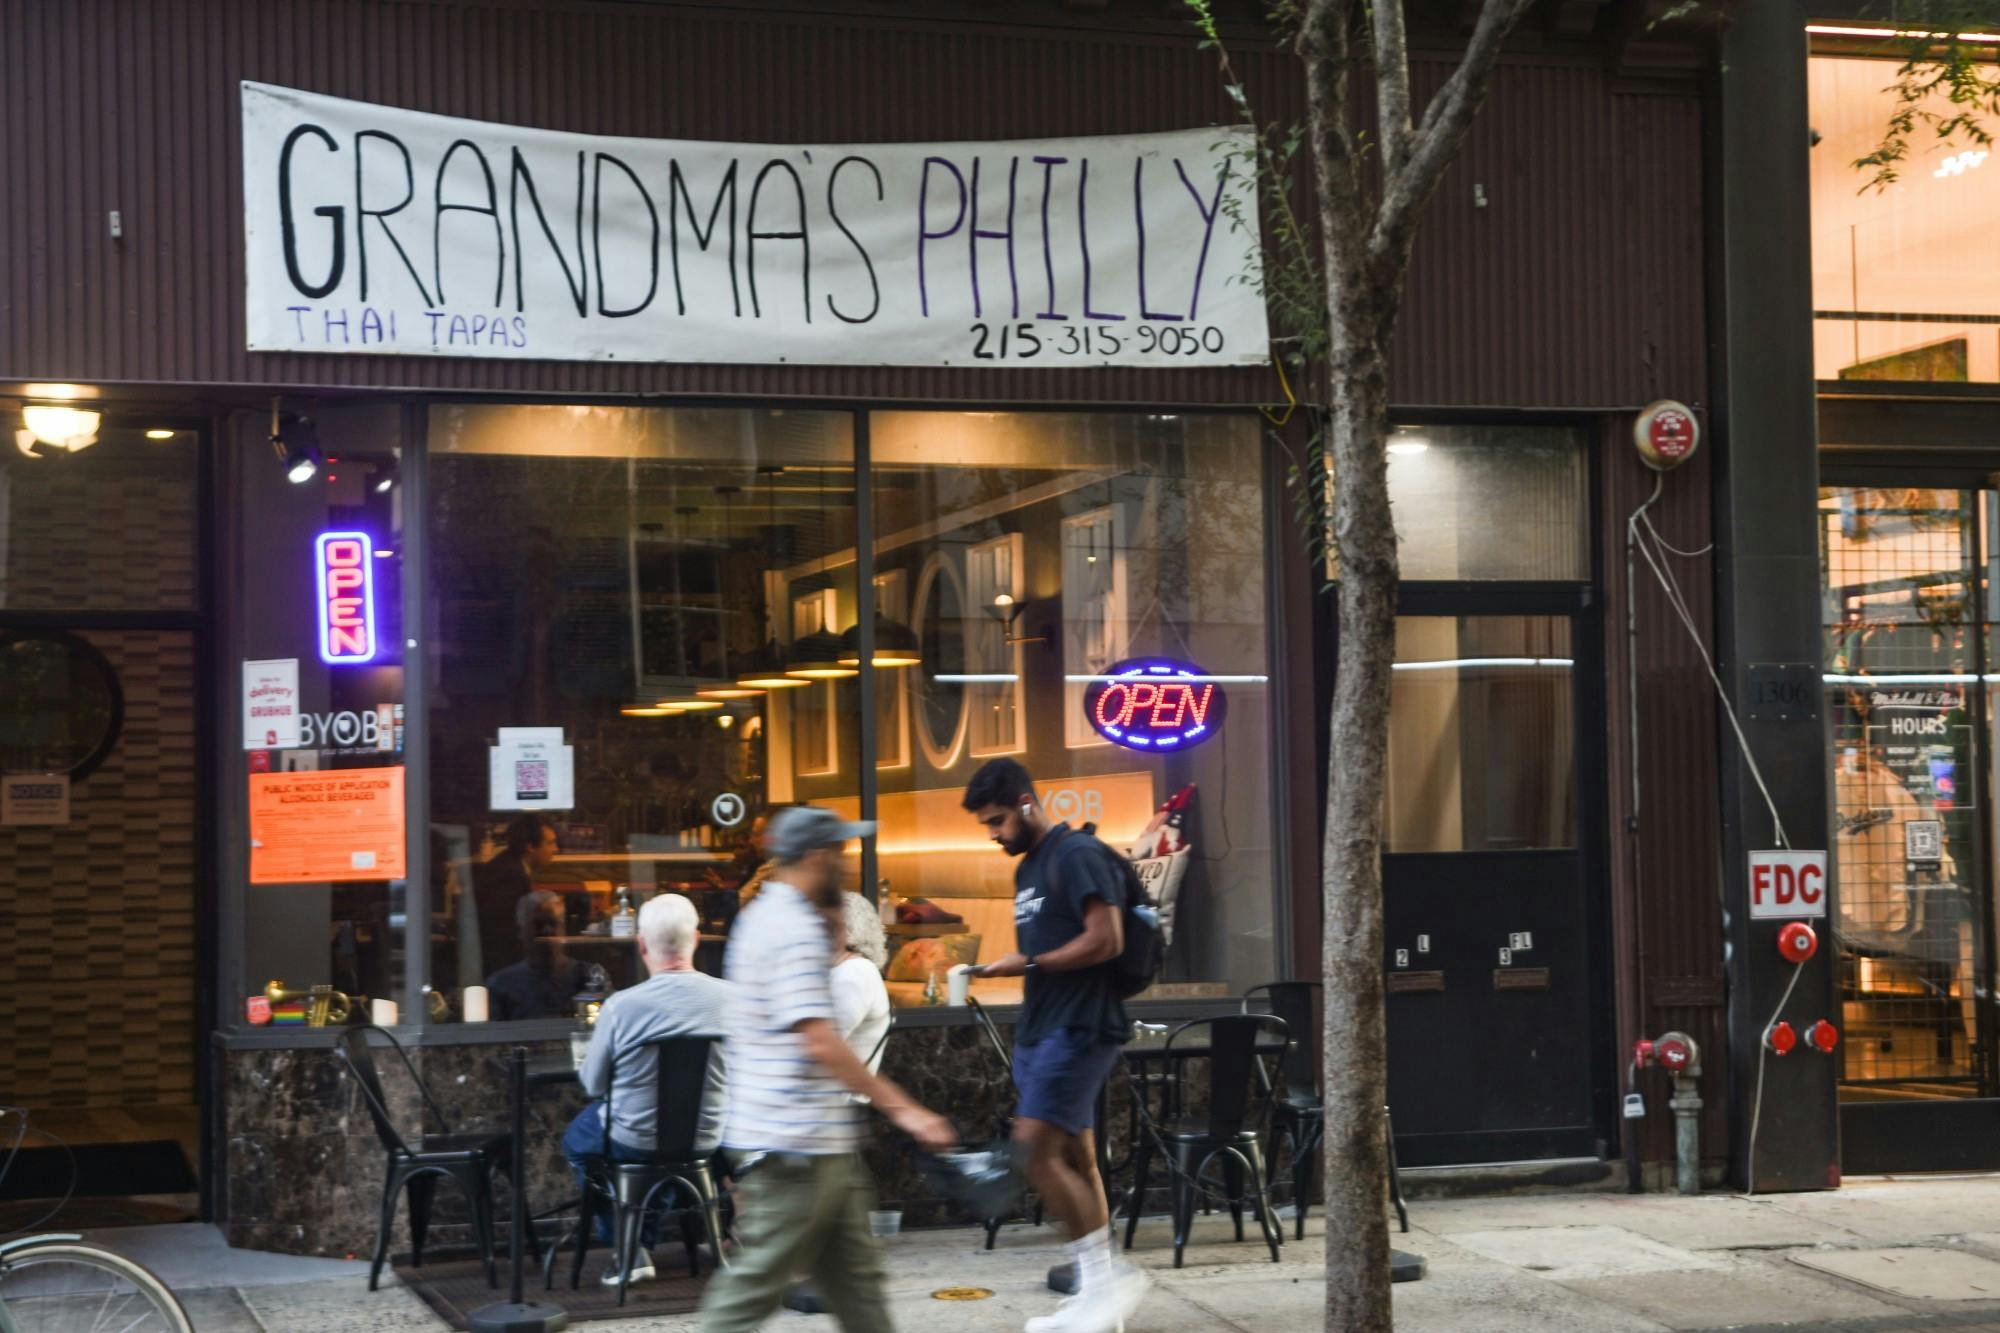 A Night Out at Grandma's Philly